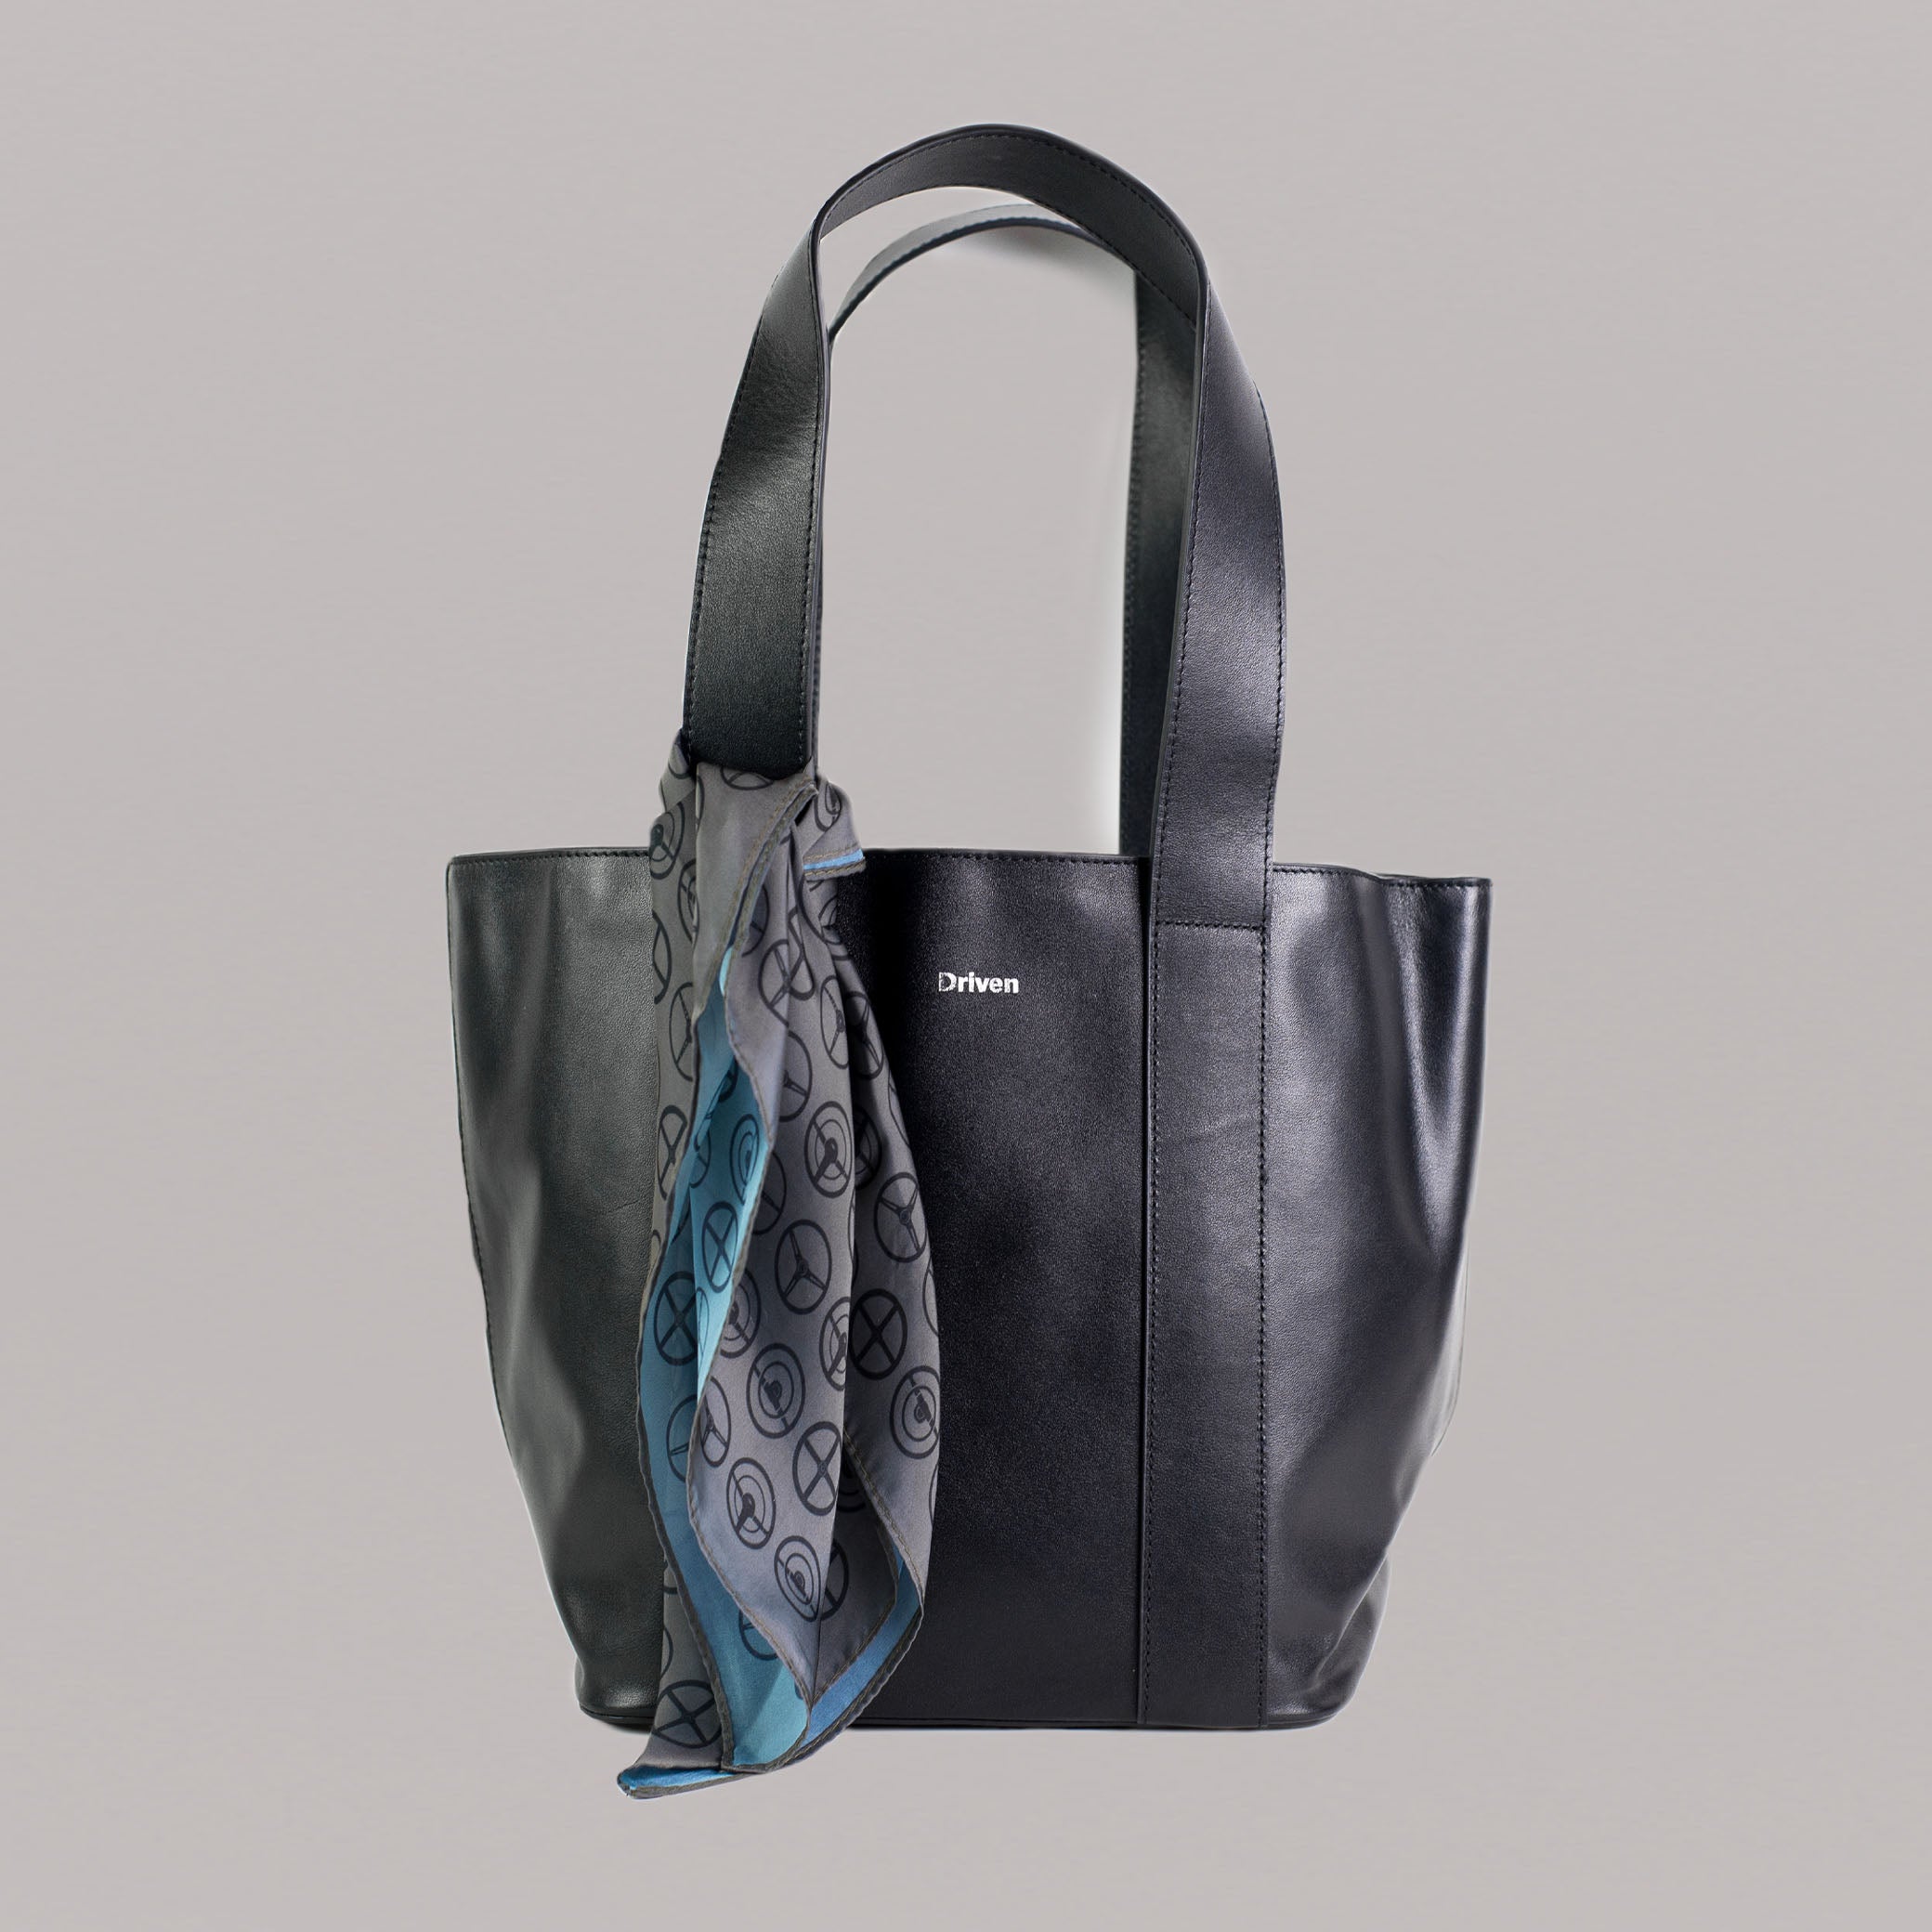 Women's Leather Driving Tote